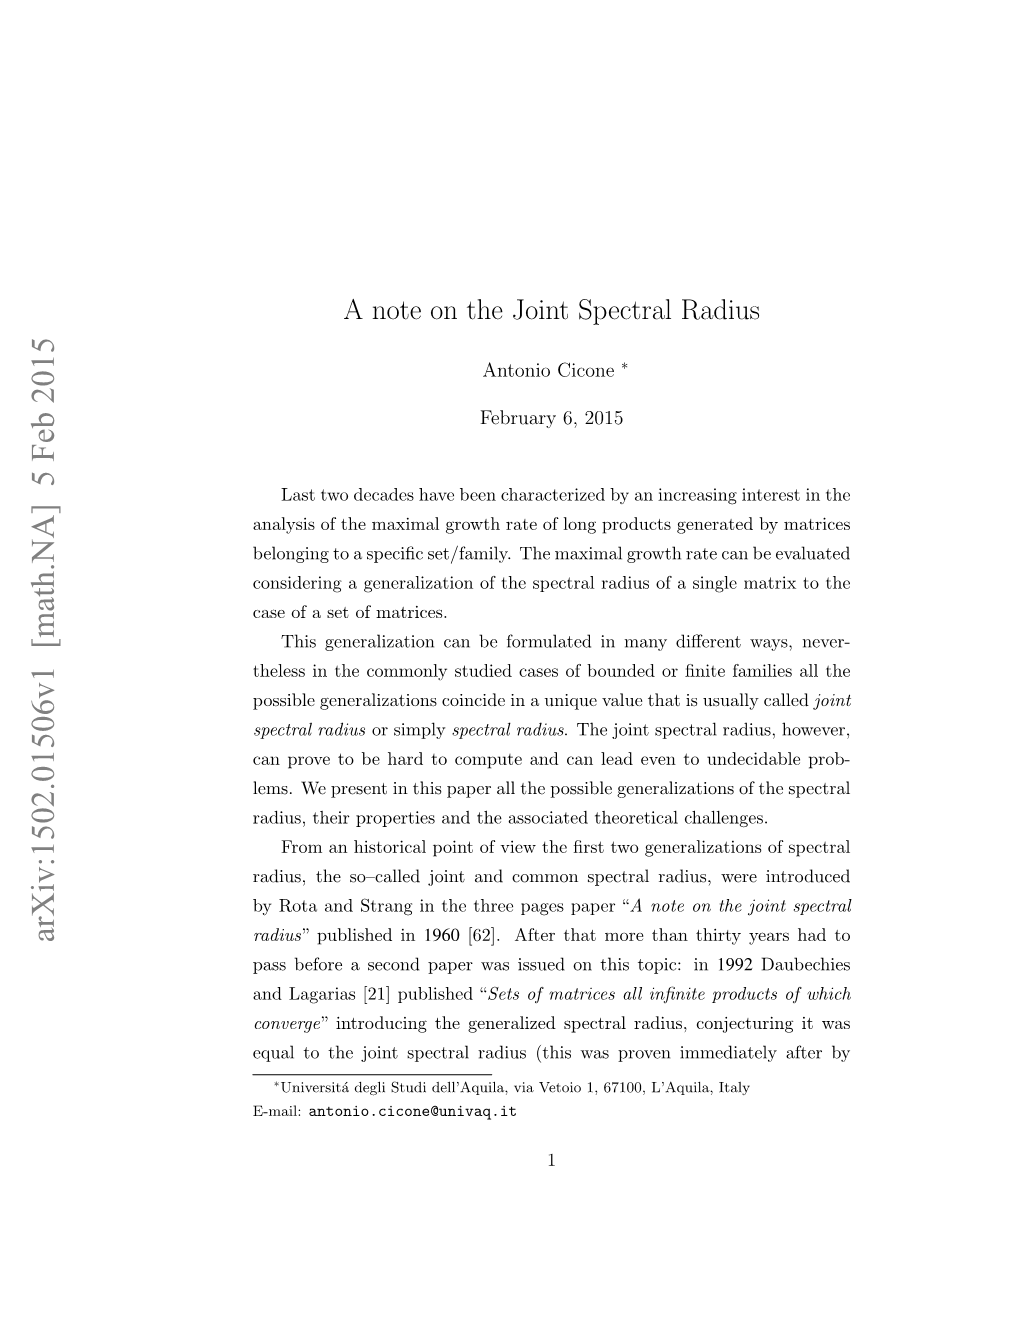 A Note on the Joint Spectral Radius